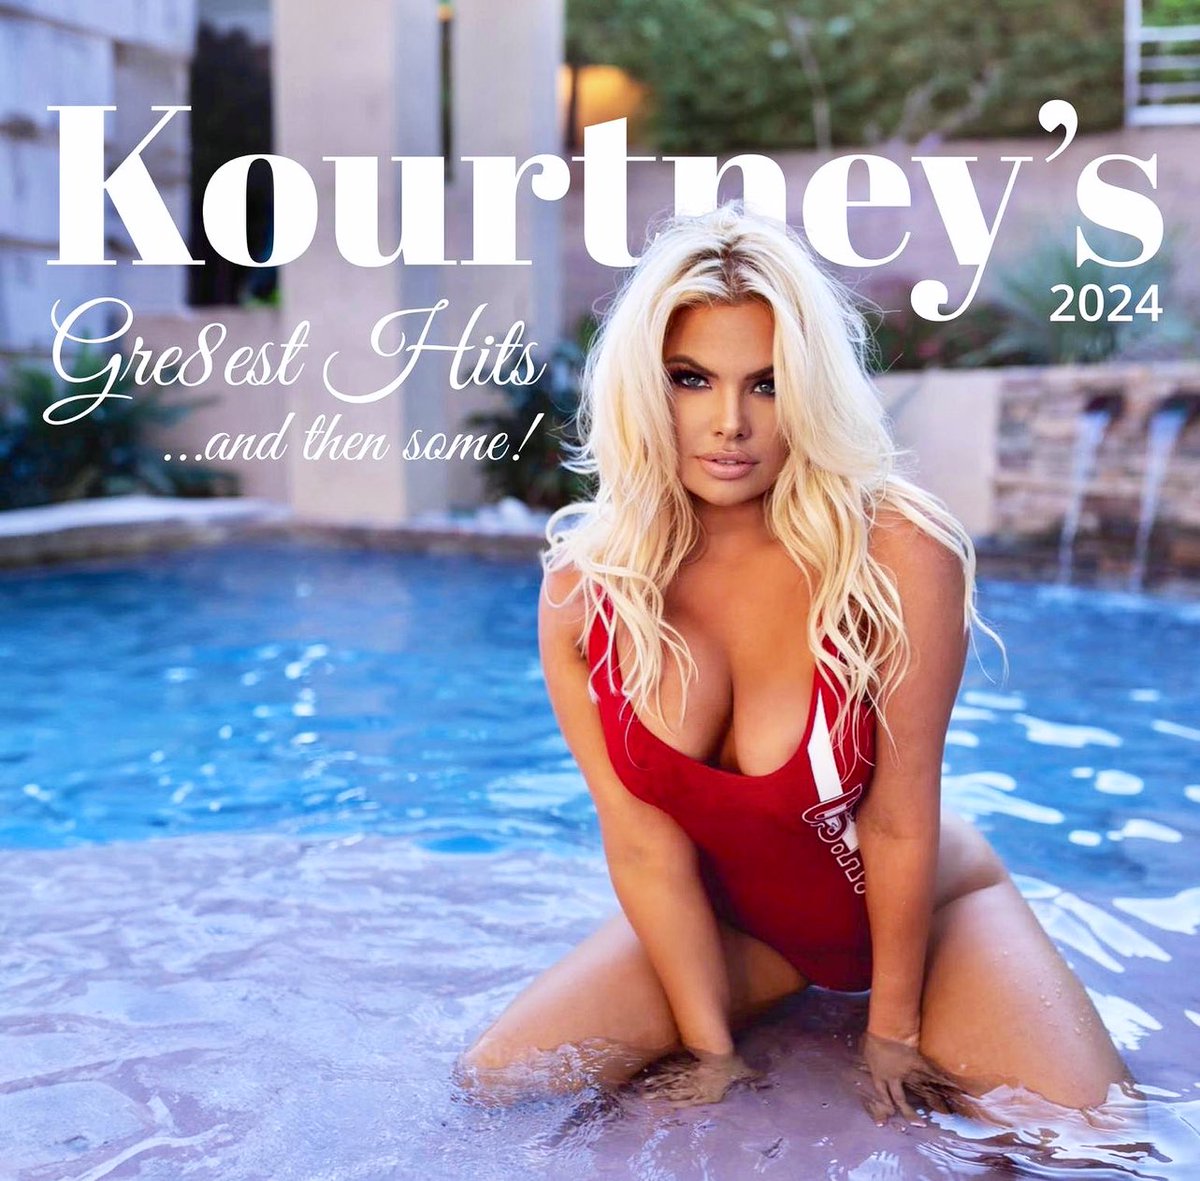 🚨🚨 Preorder now my 2024 calendar! Kourtney’s Gre8est Hits… and then some!! Get all your perks at the lowest price to date! #Retweet to show your support 🚨🚨 ilovekourtney.com/product/2024-k…